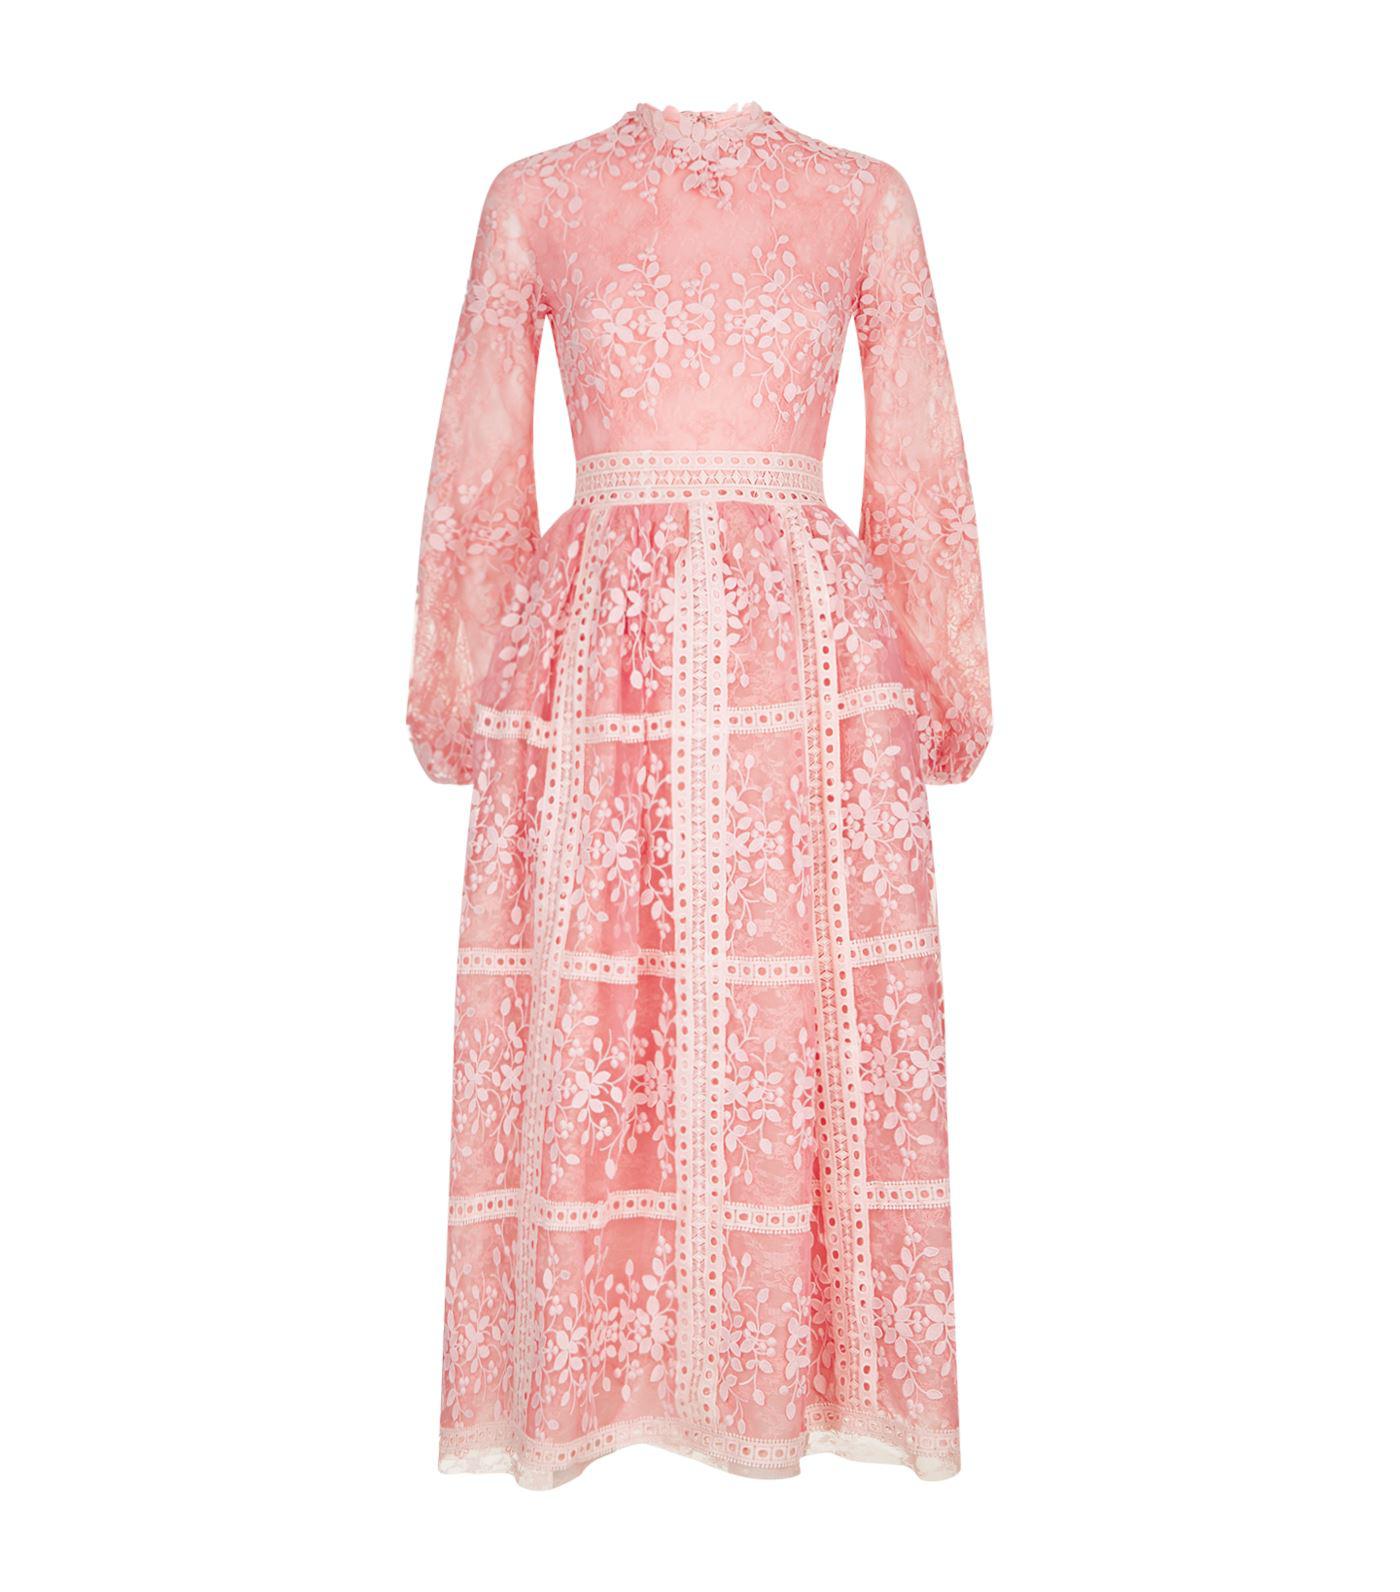 Costarellos Lace Bishop Sleeve Midi Dress in Pink - Lyst